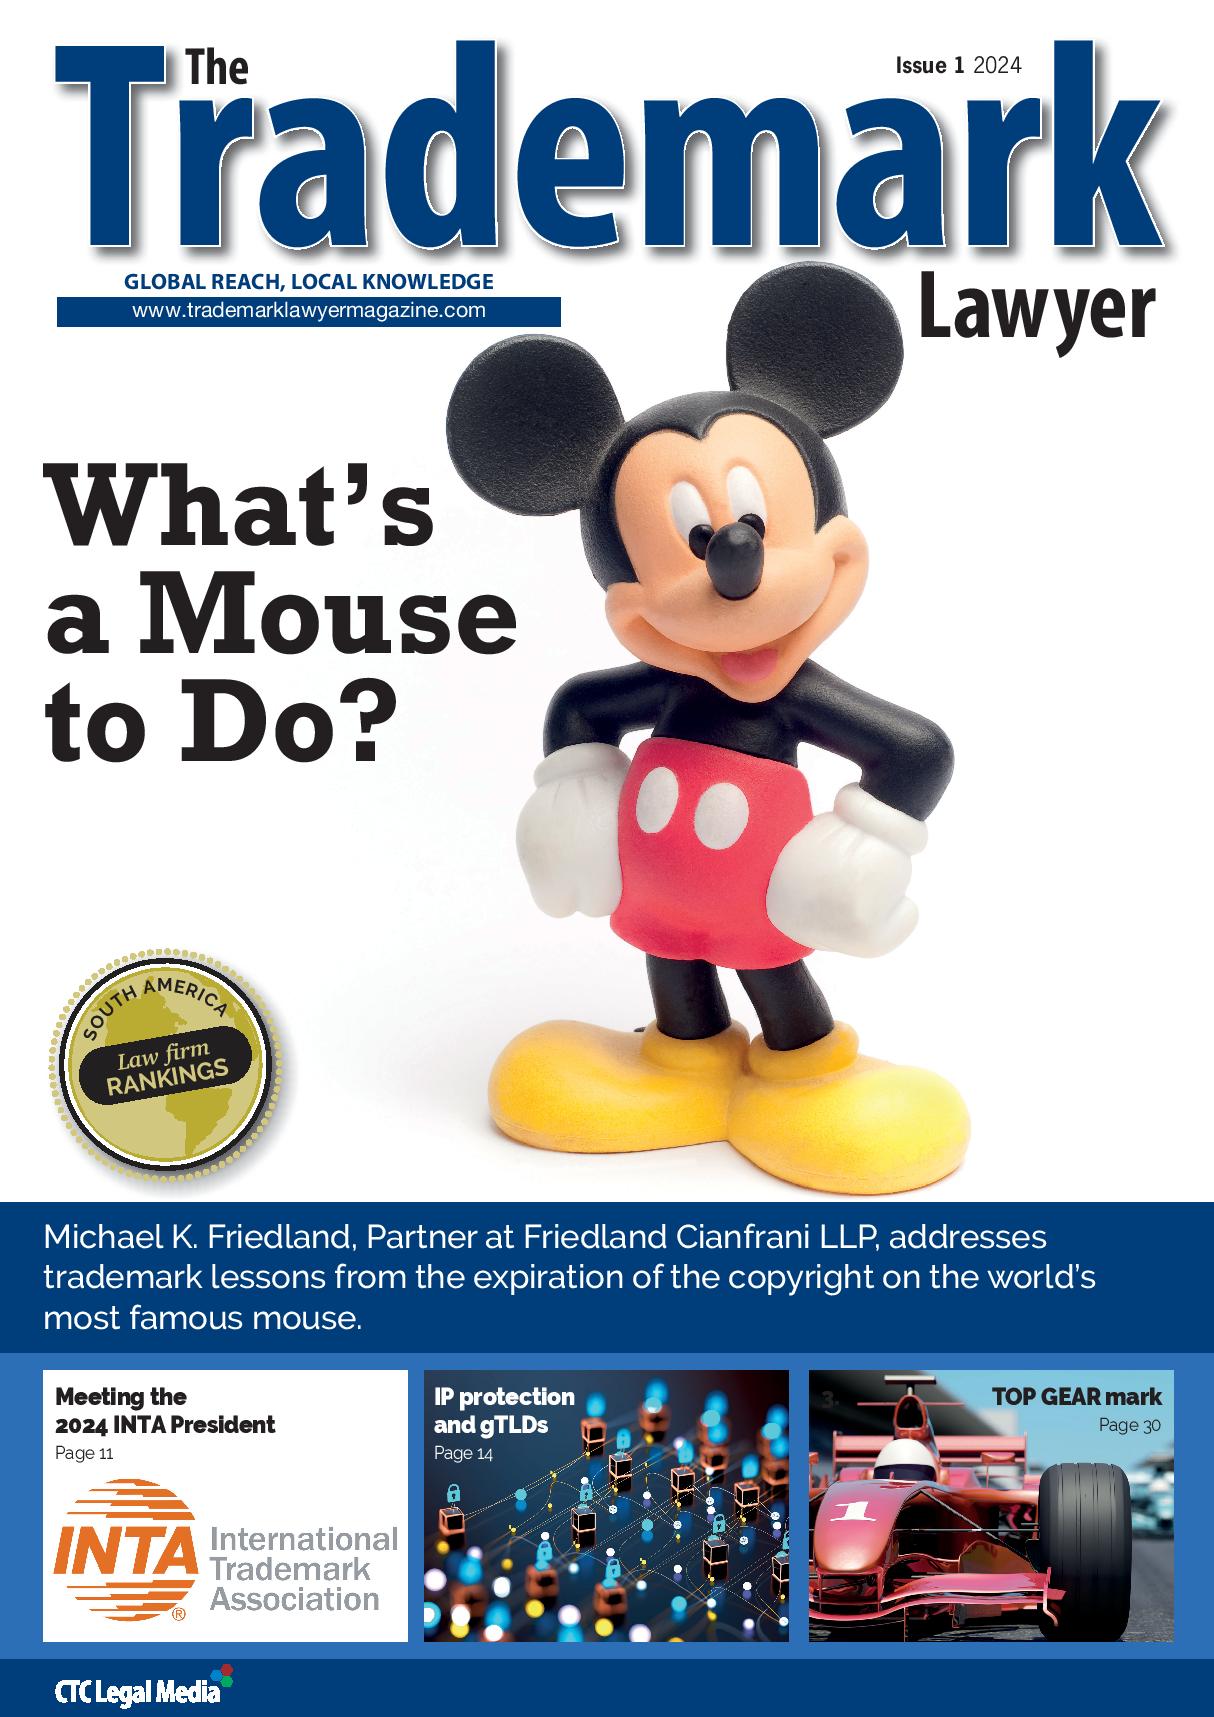 The Trademark Lawyer Issue 1, 2024